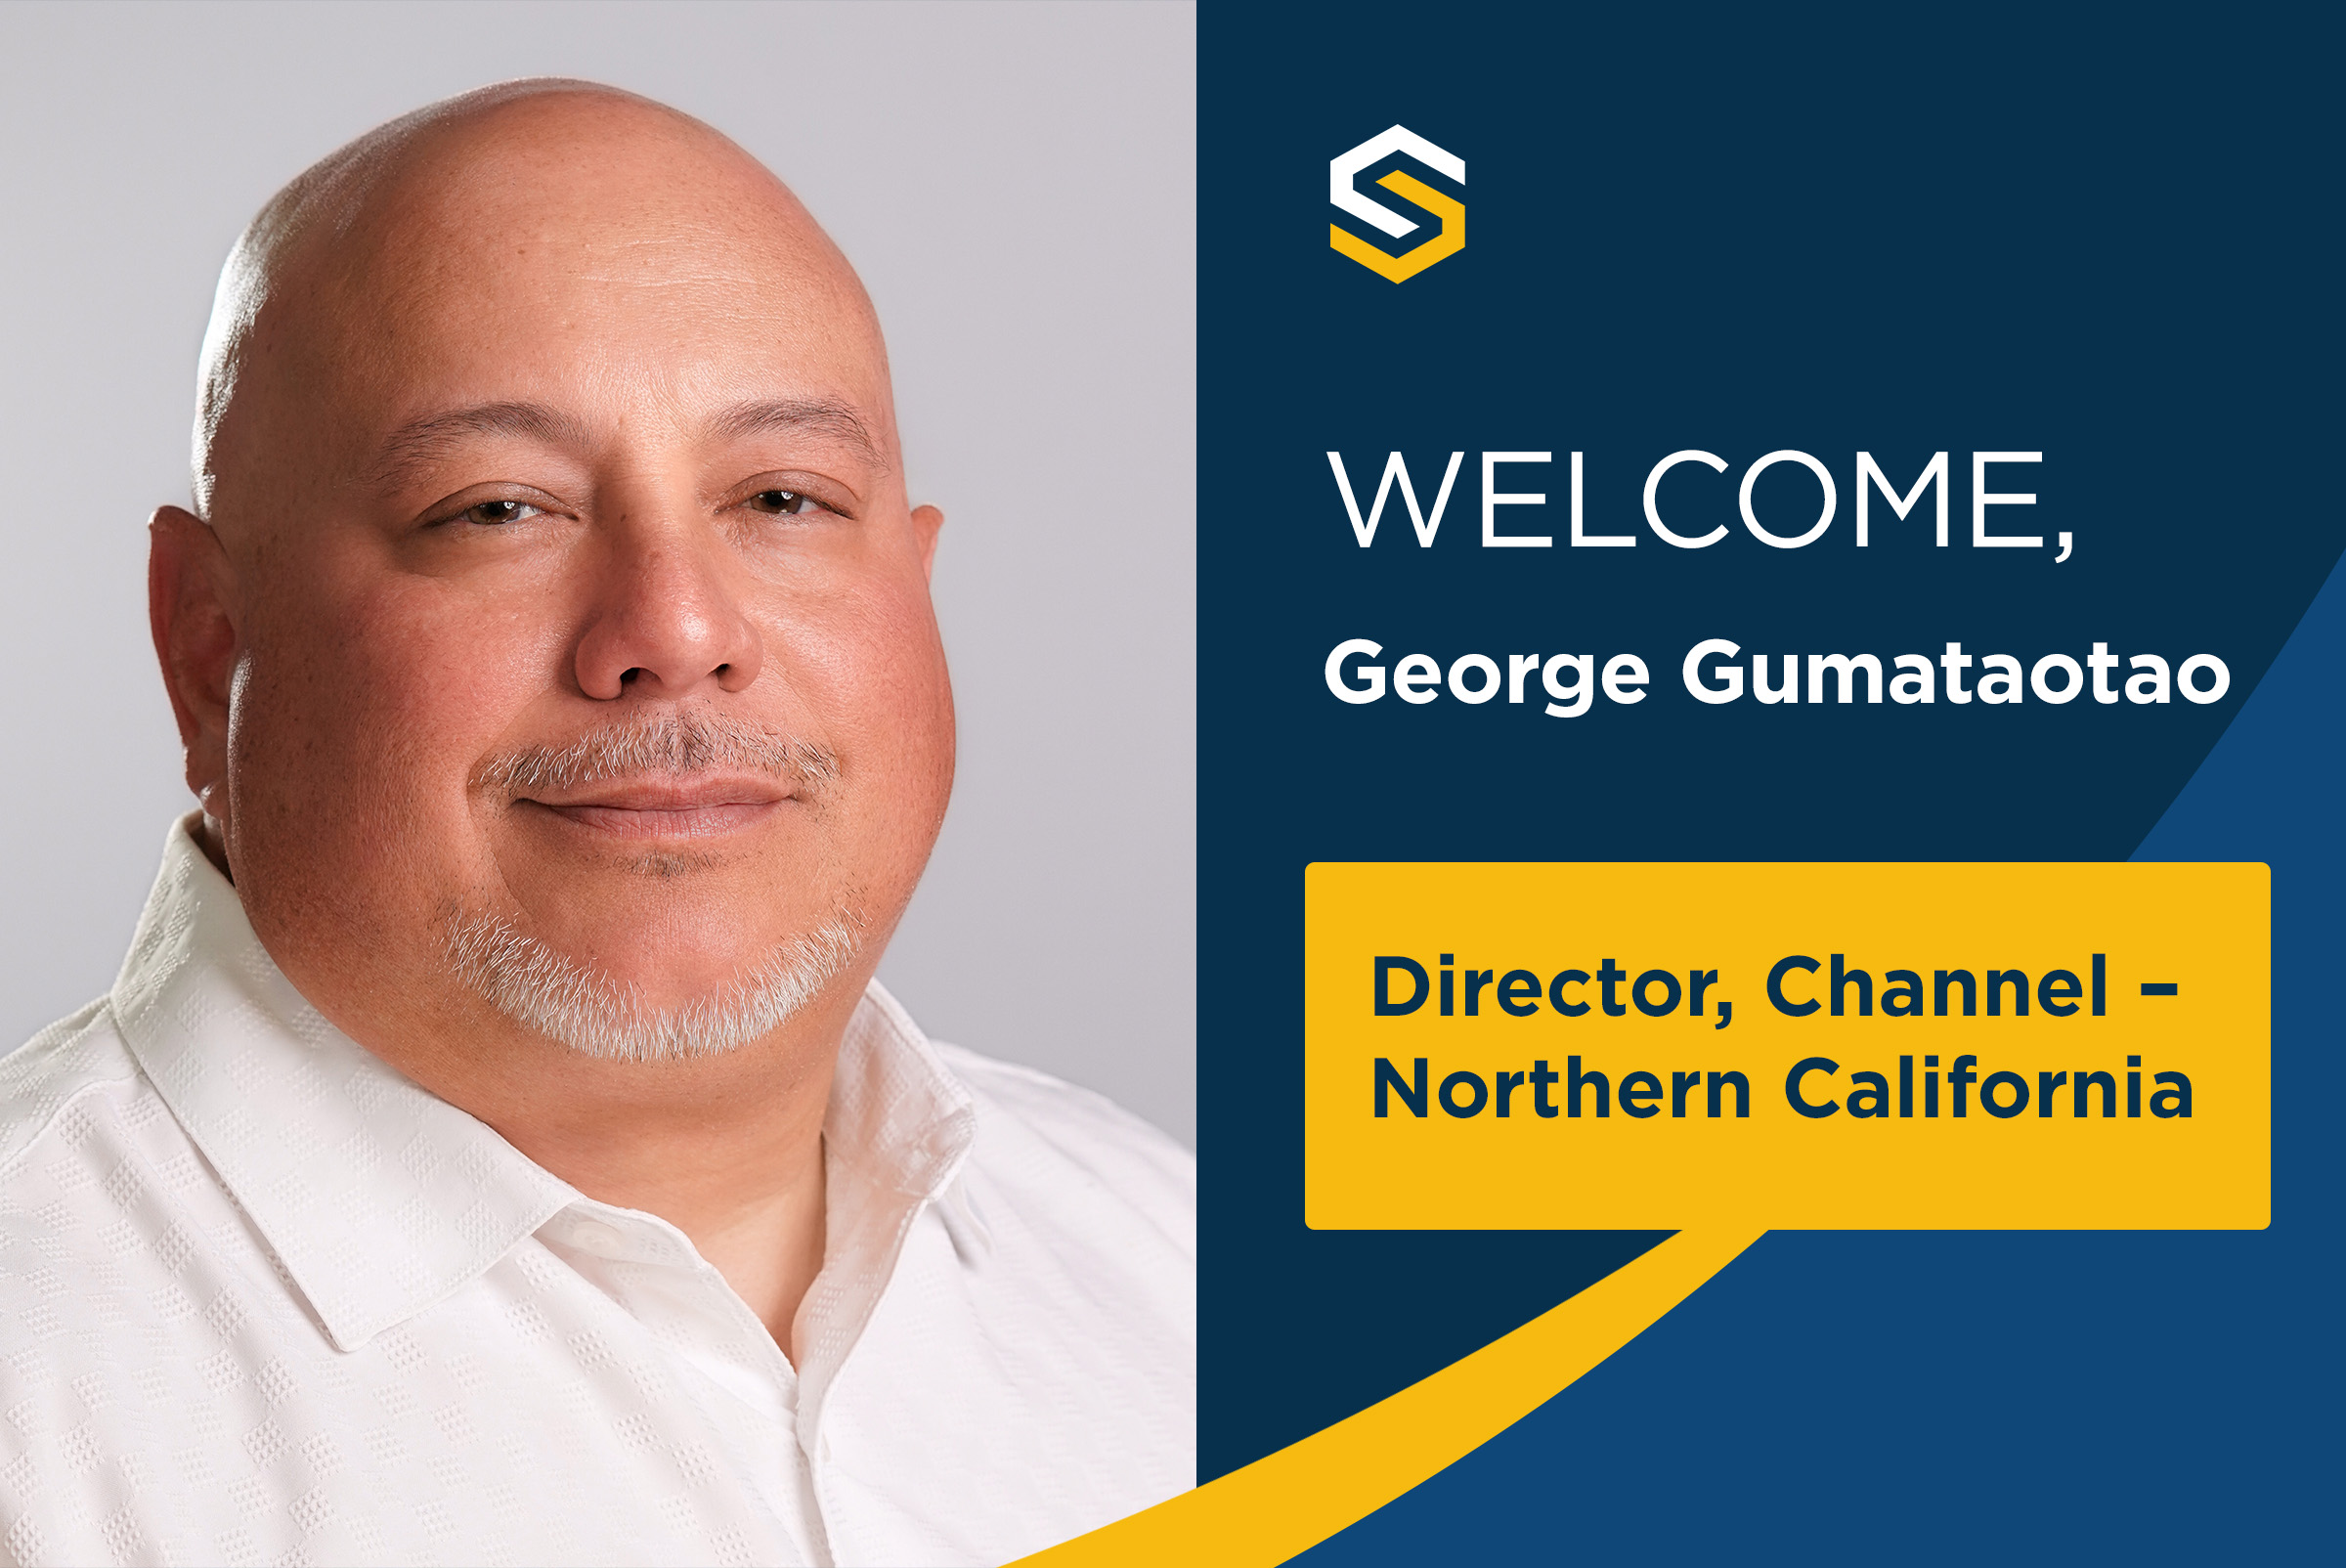 Sandler Partners Welcomes George Gumataotao as Director, Channel - Southern California